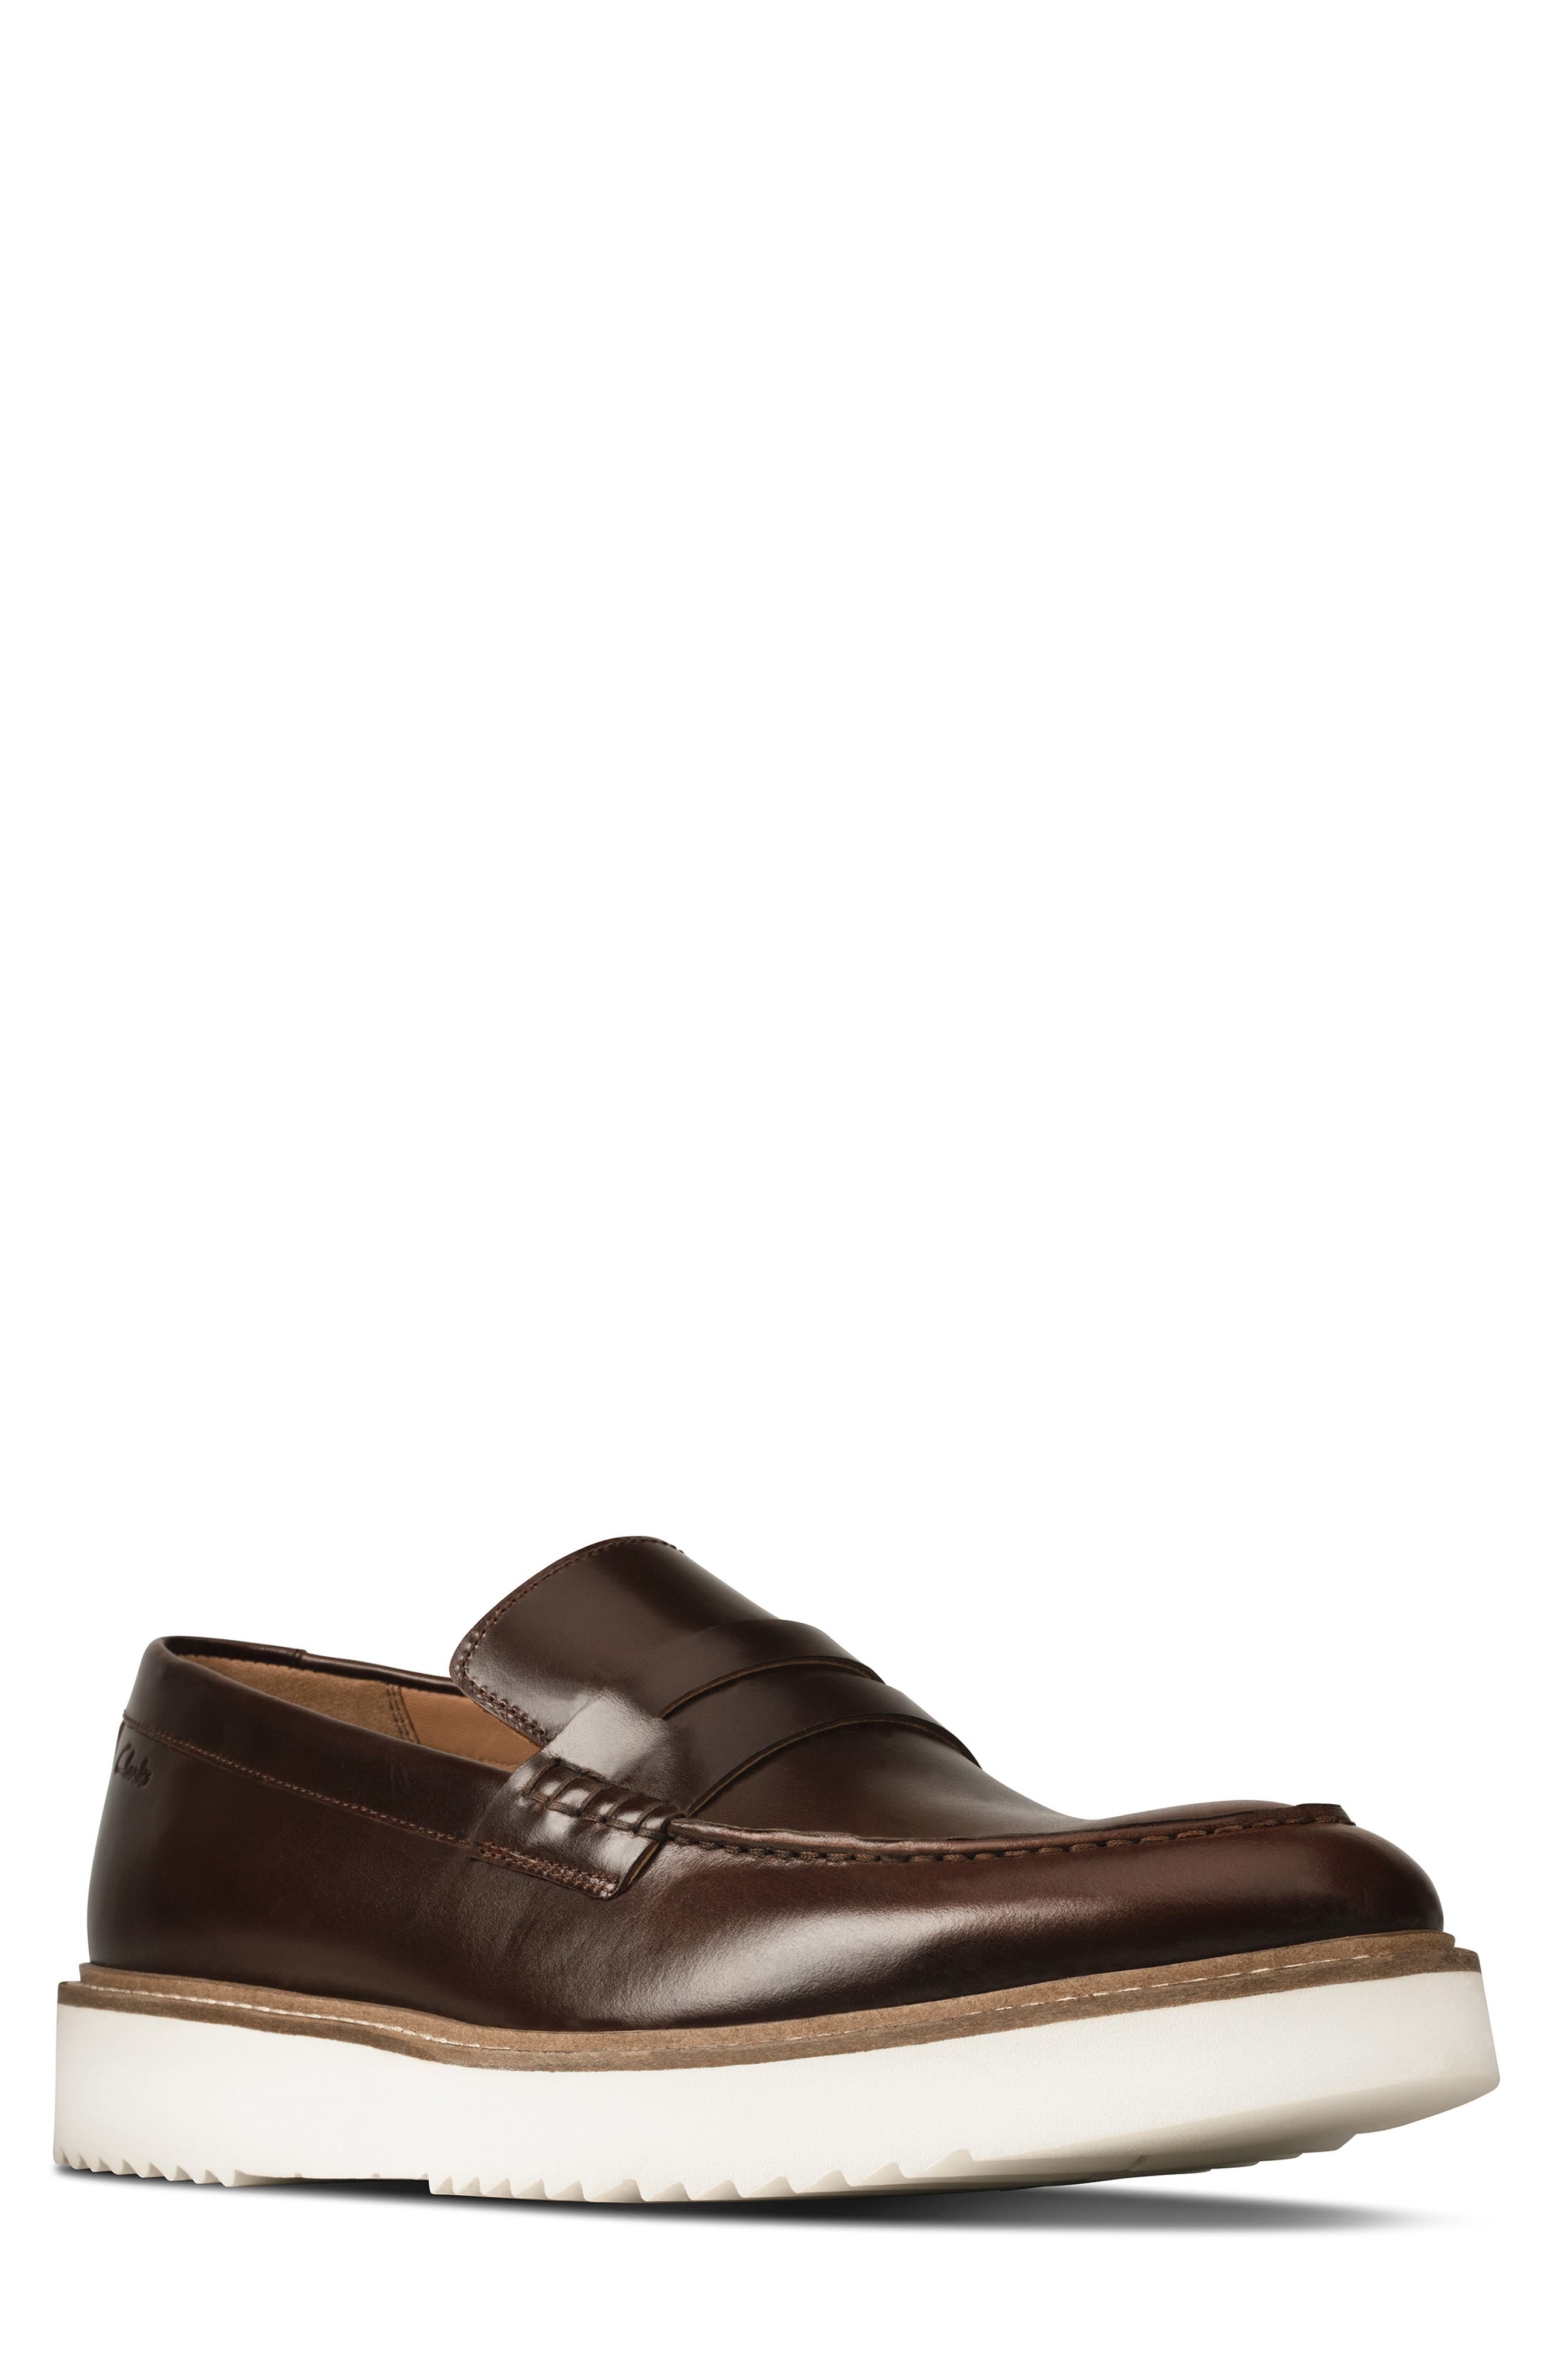 clarks shoes penny loafer